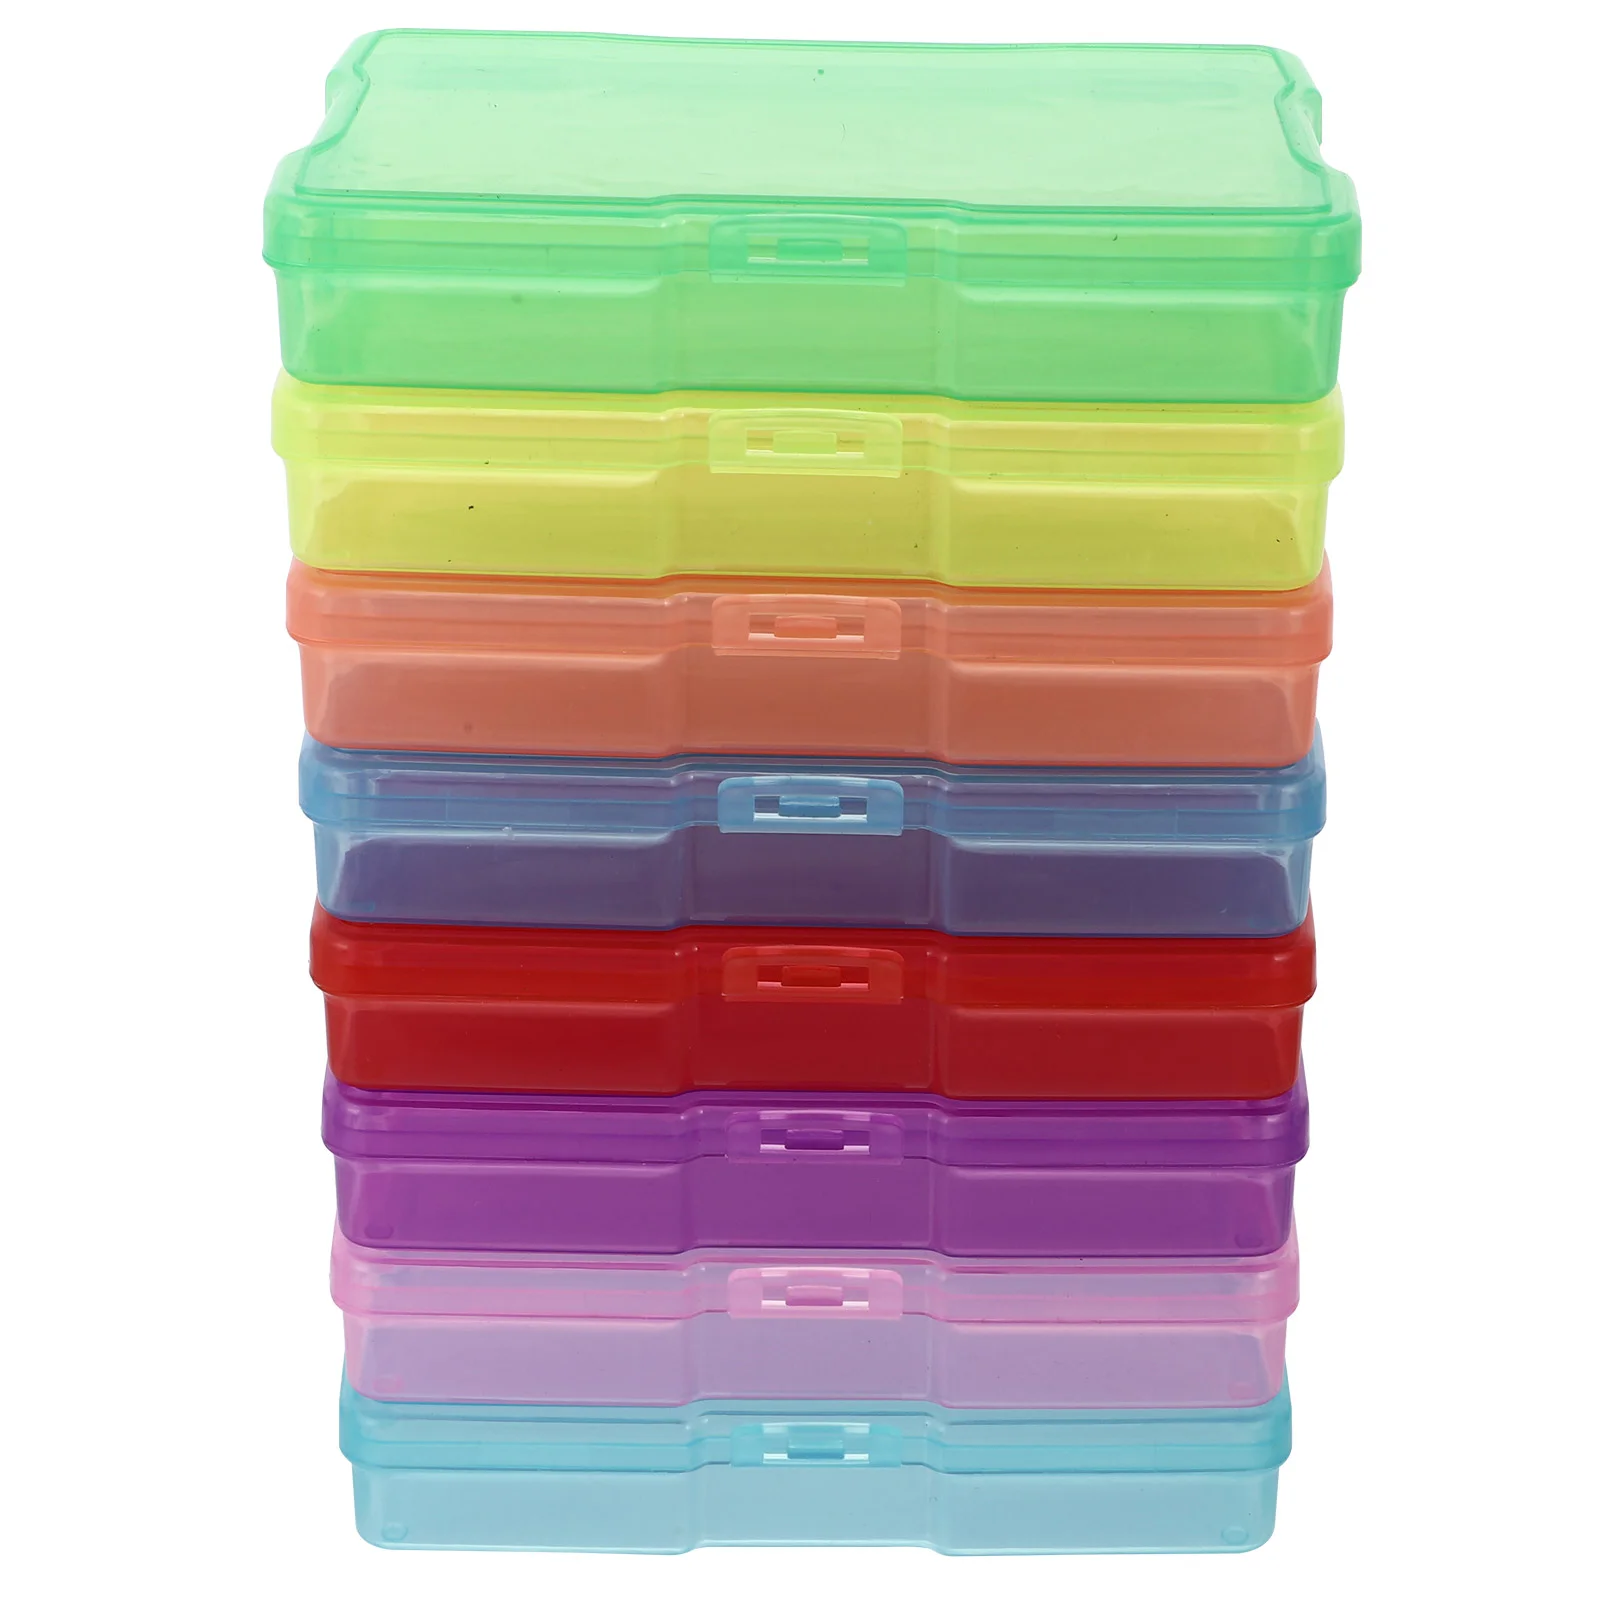 

Photo Storage Box Photos Carry Case Screws Organizing Container Plastic Holder Electronic Component Containers Clothes Frames